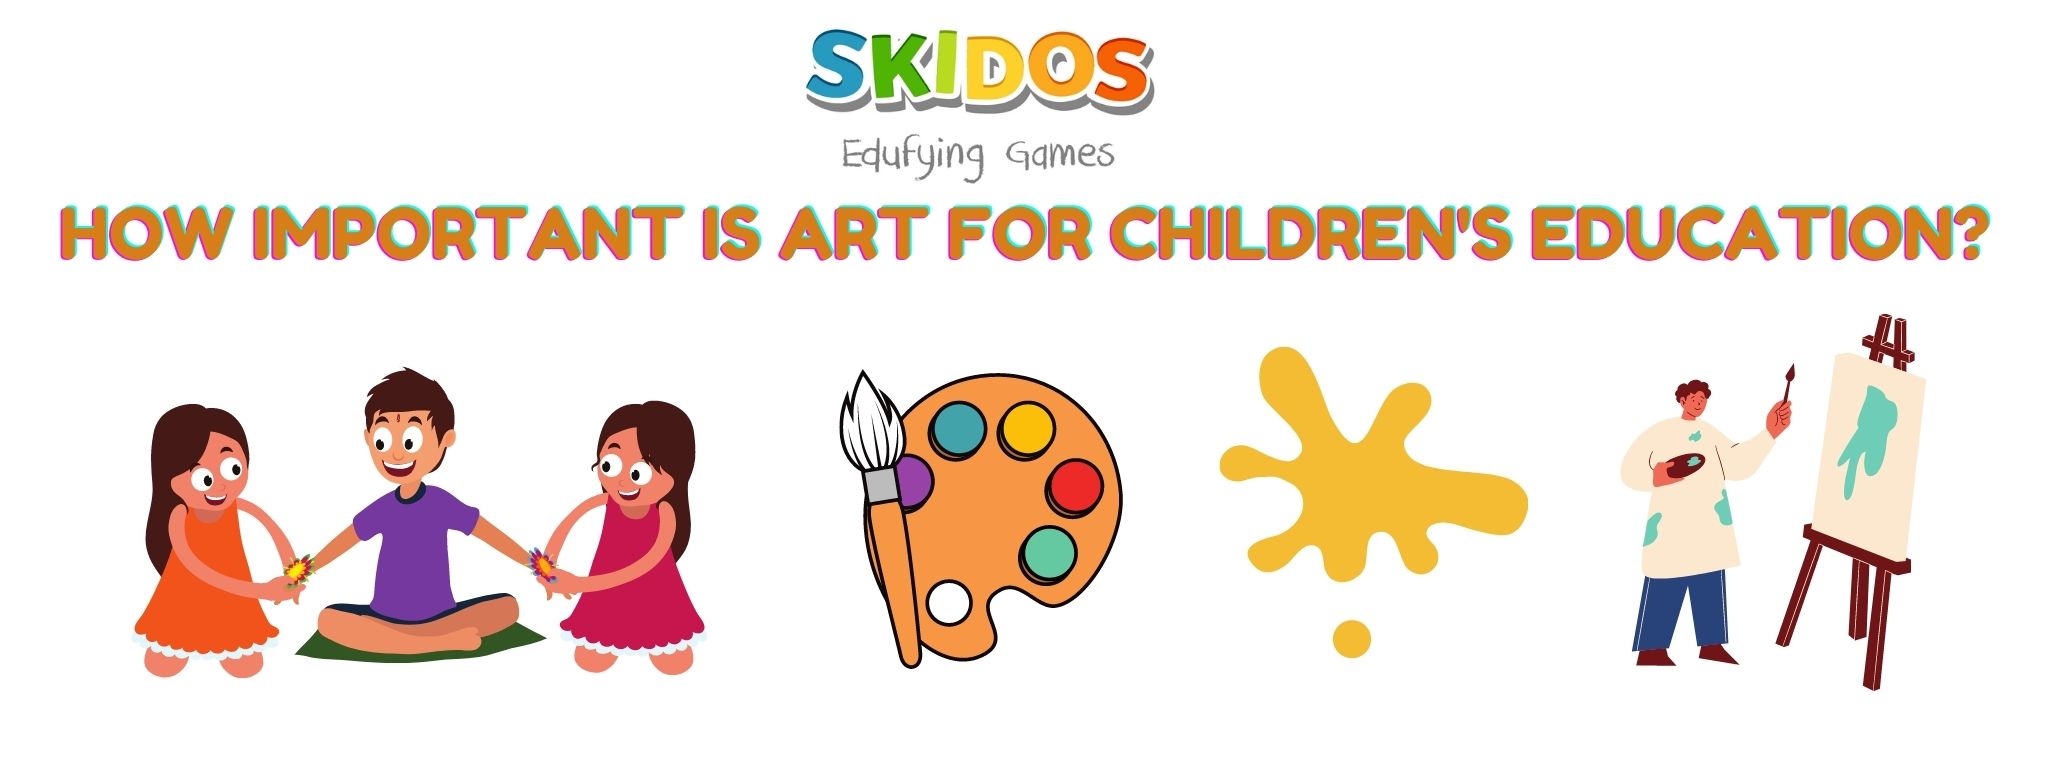 How important is art for children's education